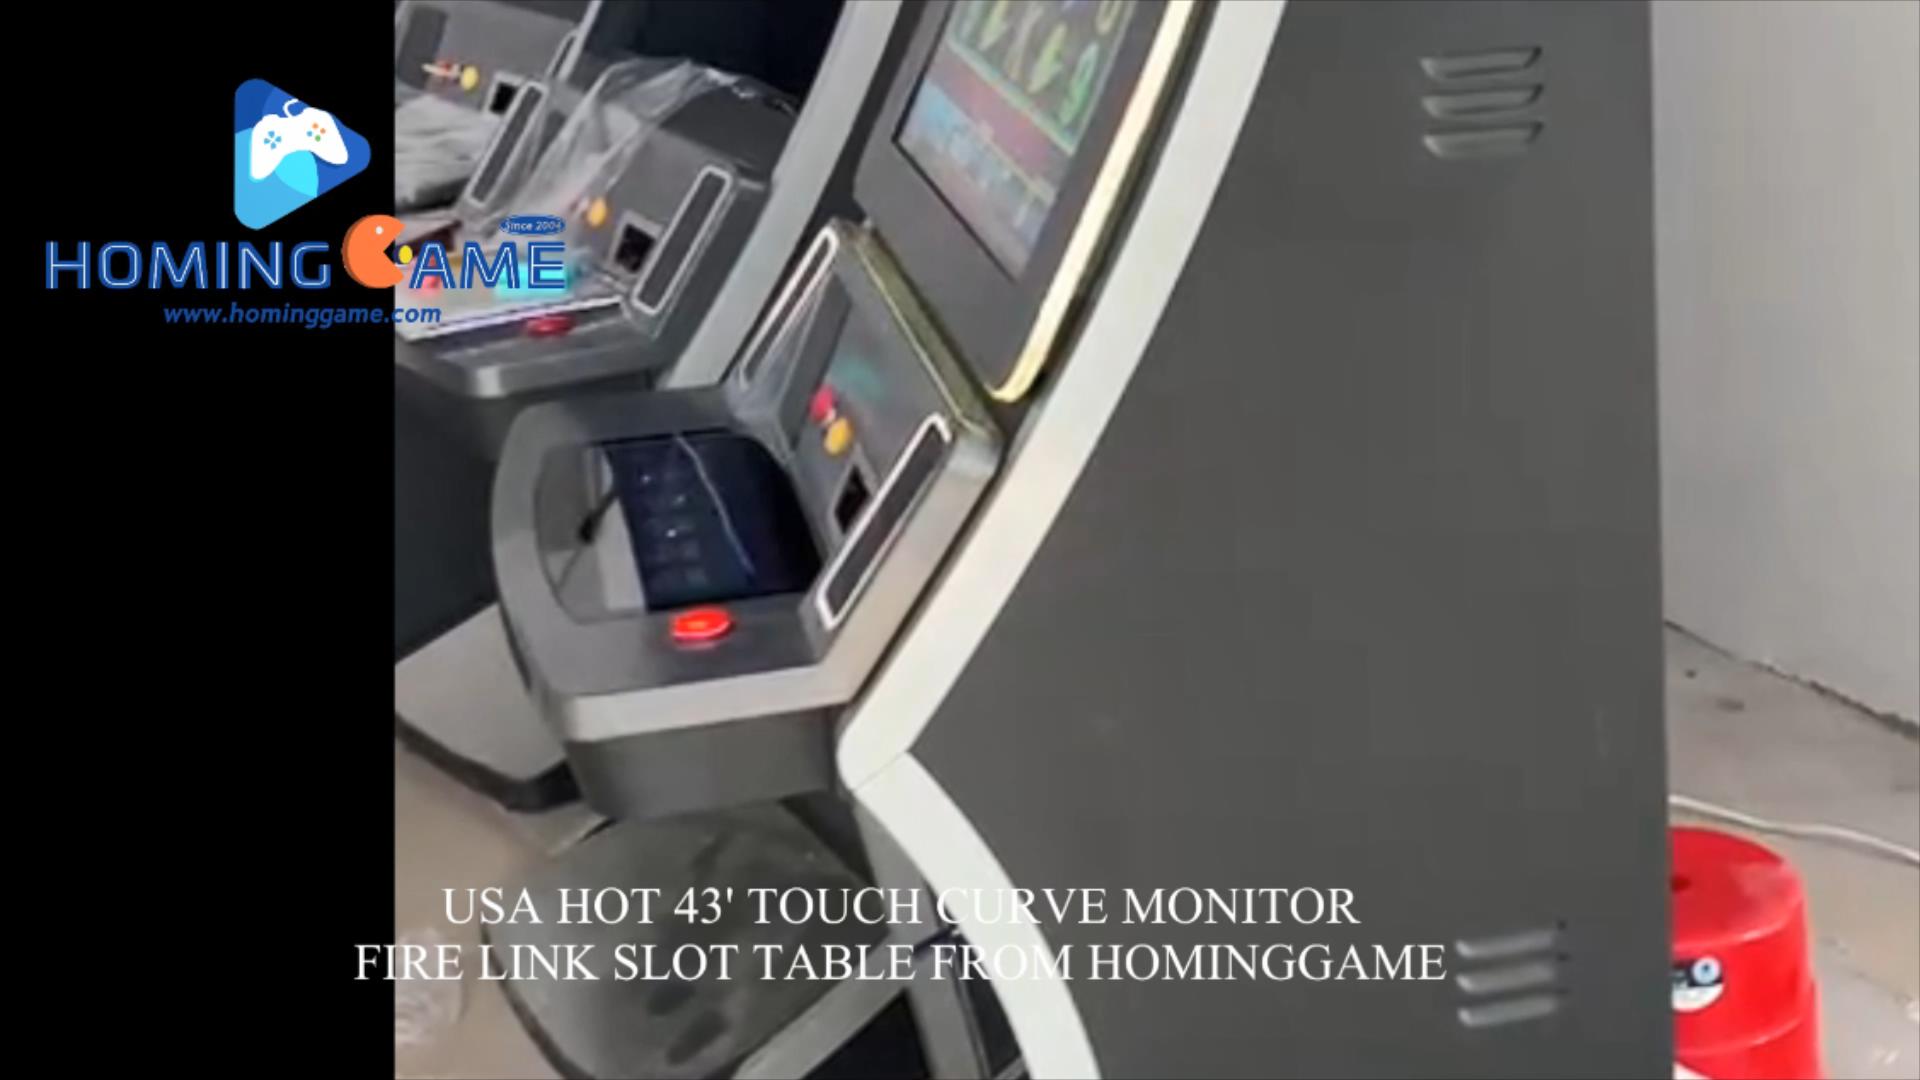 2021 HomingGame Top Sale USA 43' Touch Curve Monitor 8 in 1 Fire Link Slot Table Game Machine With Touch console(Order Call Whatsapp:+8618688409495),43' touch curve monitor 8 in 1 fire link slot table game machine,8 in 1 fire link slot game machine,slot table game machine,43' touch screen fire link slot game machine,43' touch monitor fire link slot table game machine,43' curve touch monitor fire link slot gaming machine,dragon link slot game machine,panda link slot game machine,golden buffalo slot game machine,fusion 4 slot game machine,ultimate fire link,ultimate fire link slot game machine,ultimate fire link slot game,fire link slot game machine,fire link,ultimate fire link slot gaming machine,ultimate fire link slot table gaming machine,slot game,slot table game,slot gaming machine,game machine,arcade game machine,coin operated game machine,arcade game machine for sale,amsuement machine,entertainment game machine,family entertainment game machine,hominggame,www.gametube.hk,indoor game machine,casino,gambling machine,electrical game machine,slot,slot game machine for sale,slot table for sale,simulator game machine,video game machine,video game,video game machine for sale,hominggame fire link slot game,slot gaming